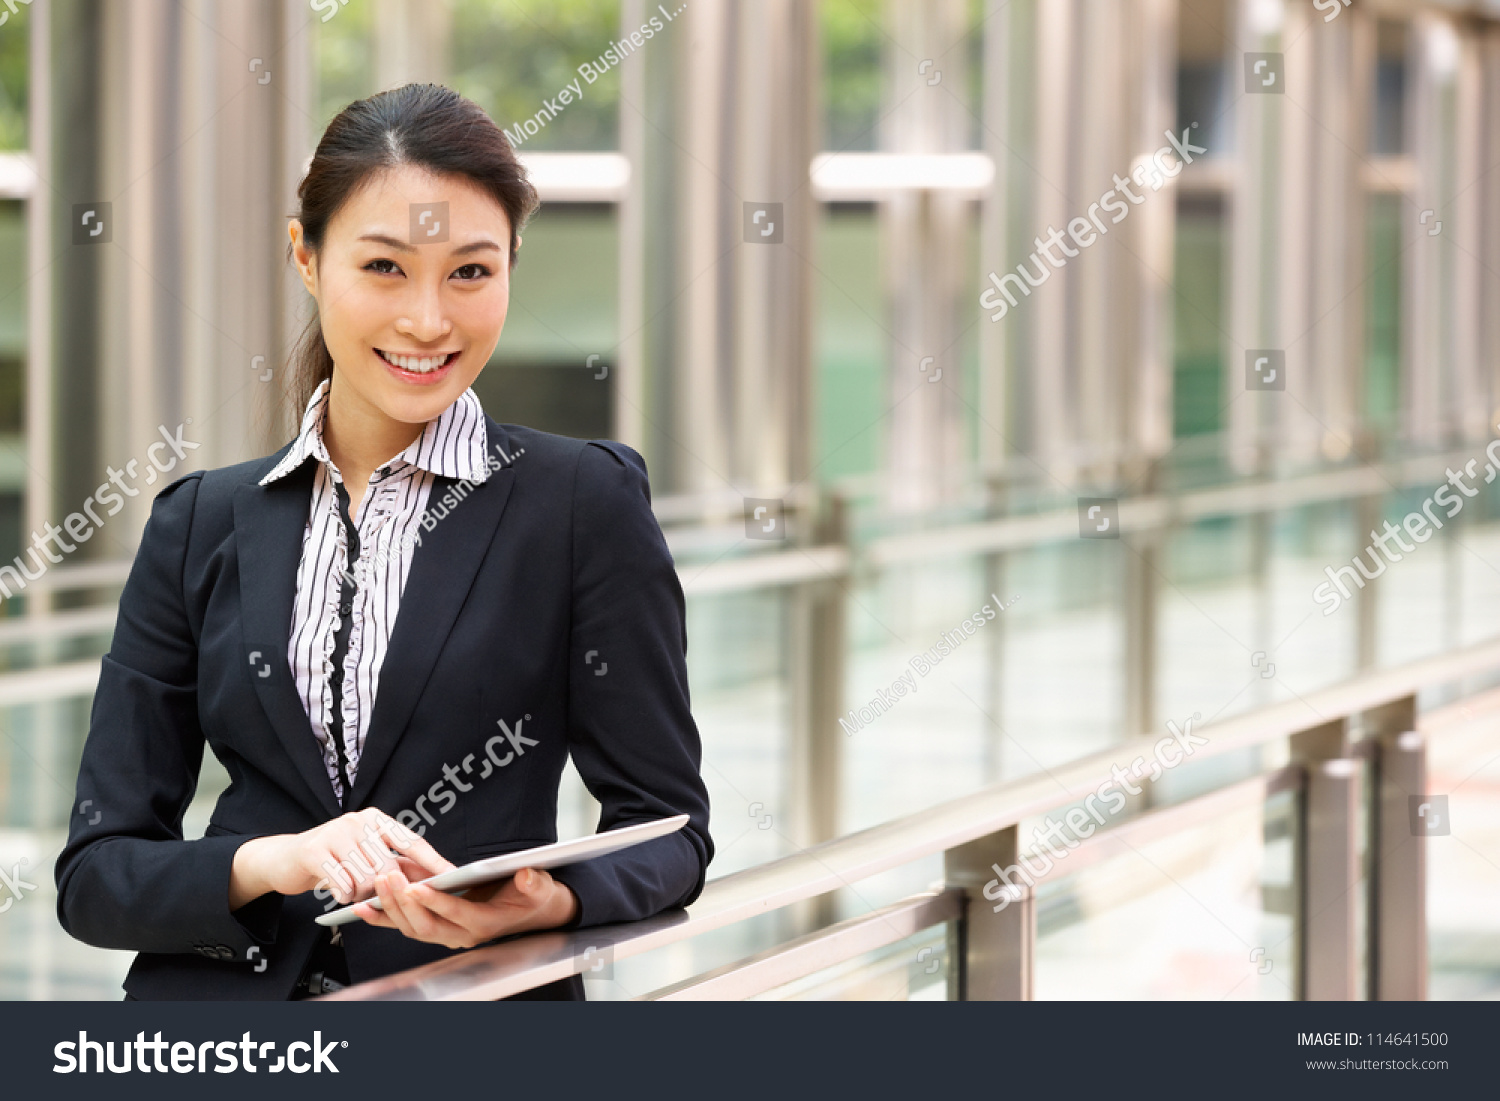 Chinese Businesswoman Working On Tablet Computer Stock Photo 114641500 Shut...